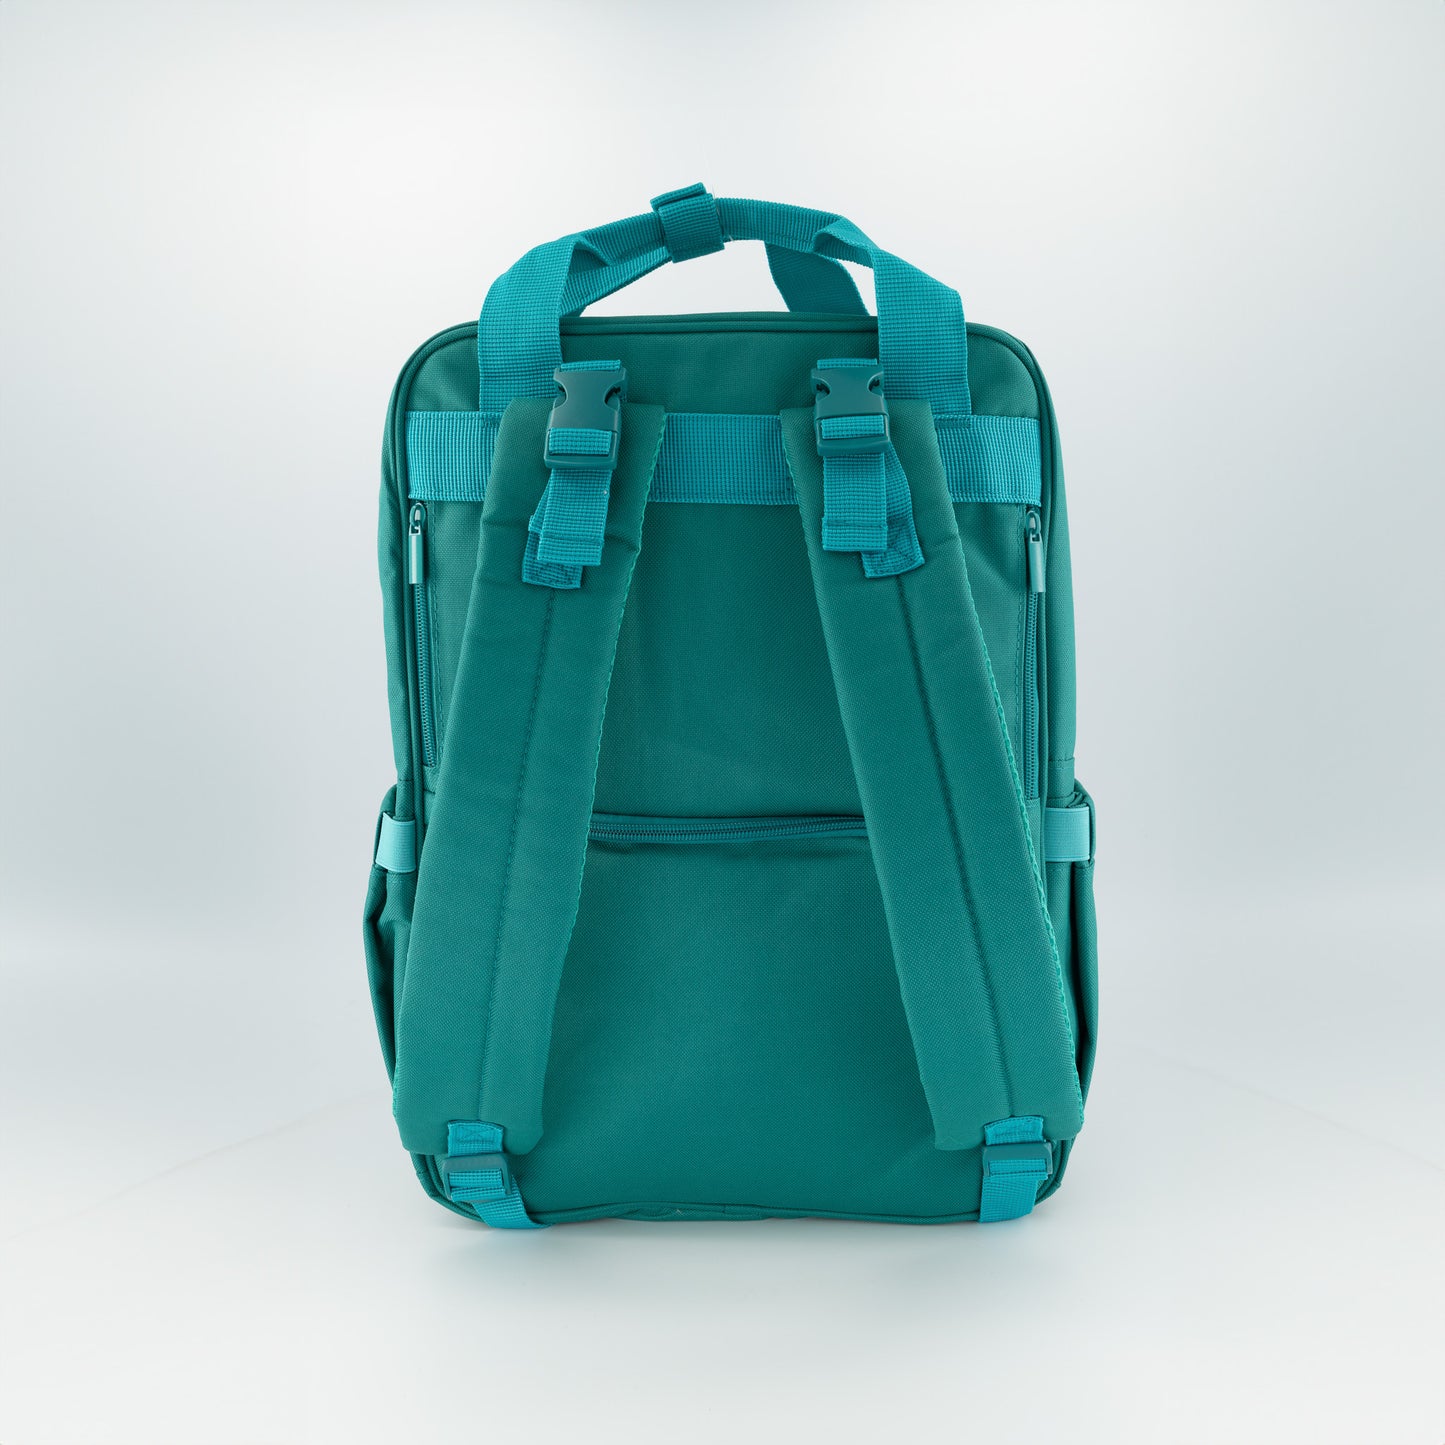 The Camy Nappy Backpack (Teal Green)